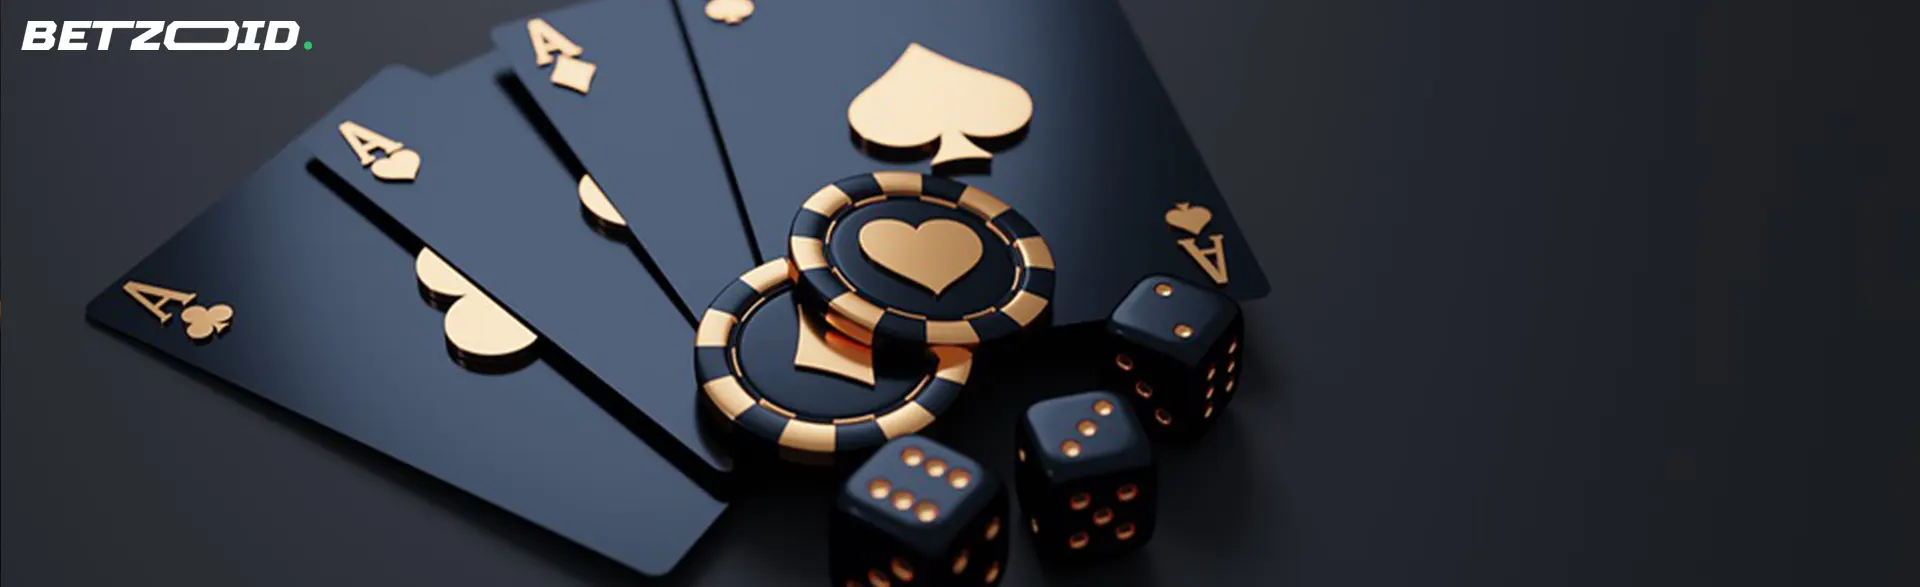 Four aces, poker chips, and dice on a black background.